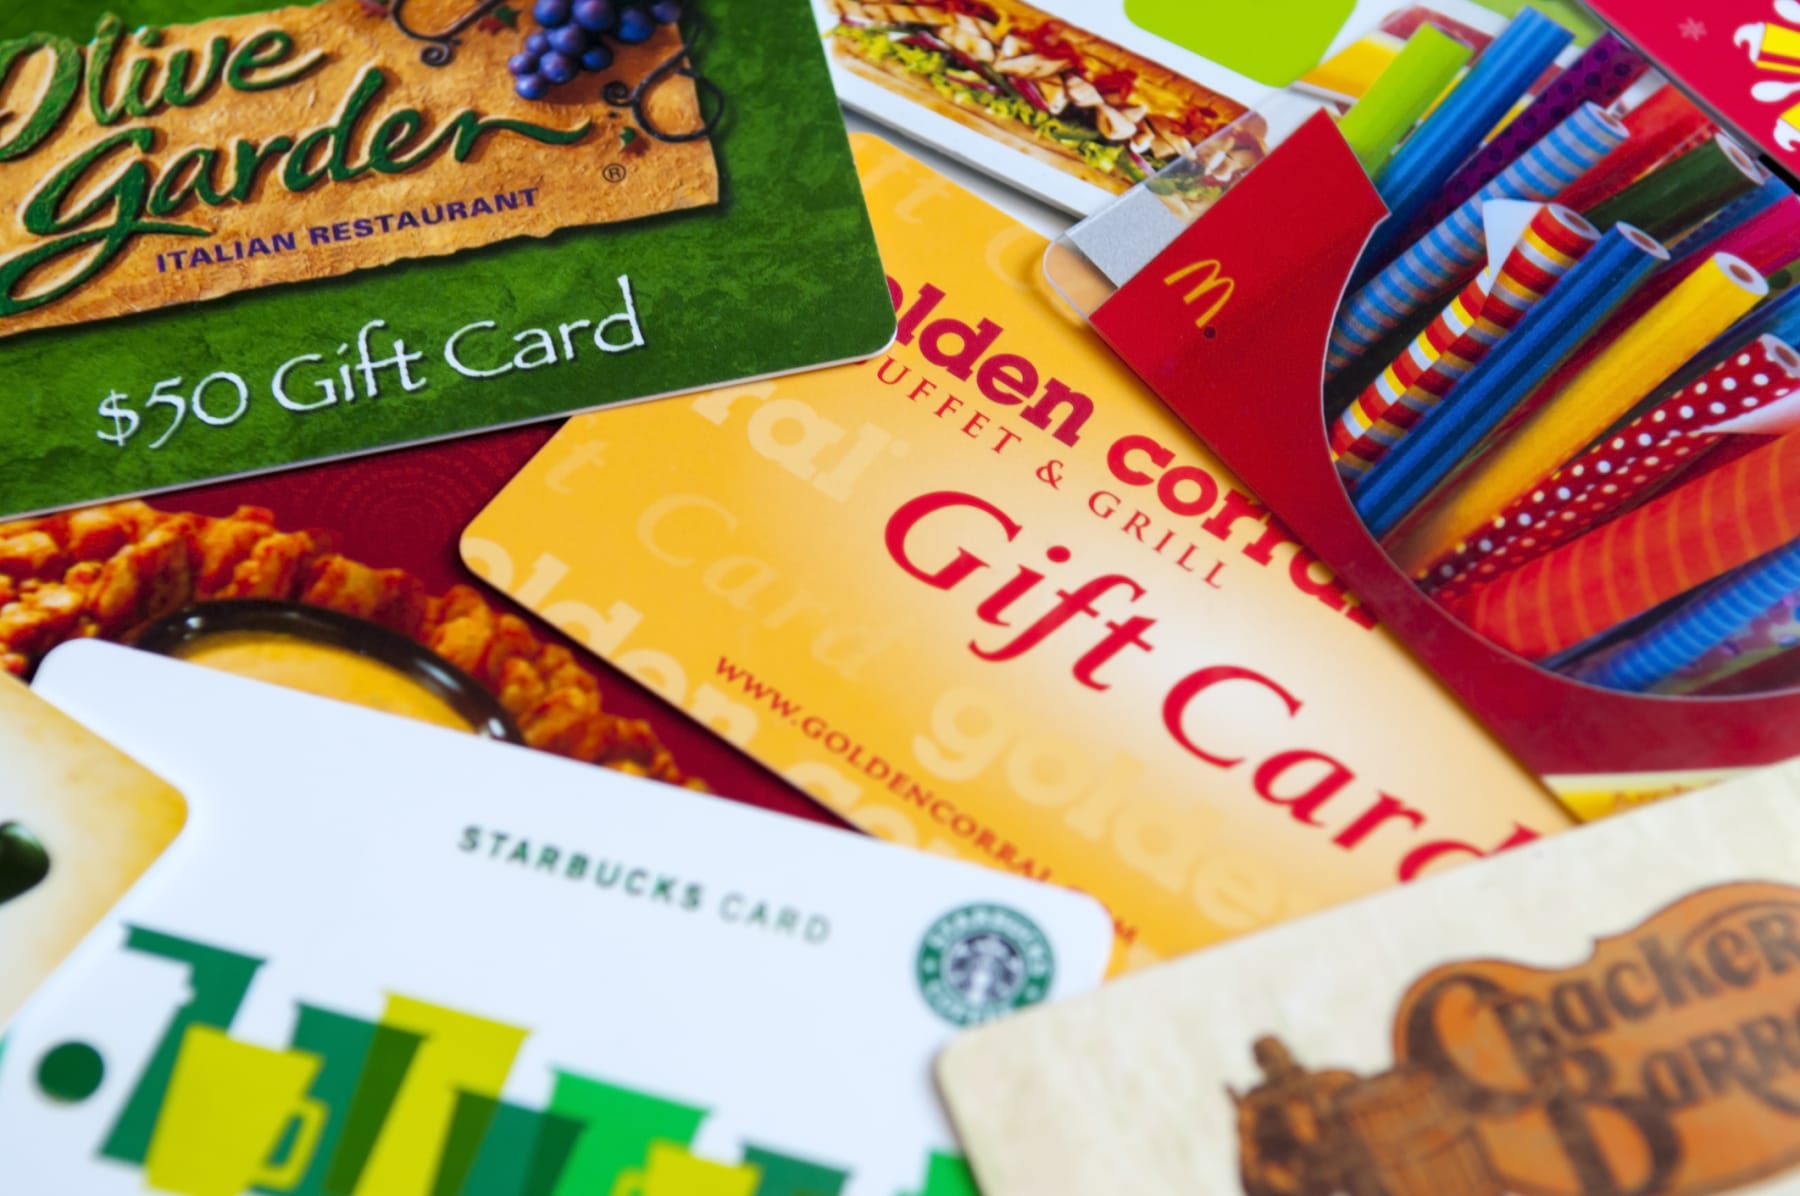 An assortment of restaurant gift cards shown together.